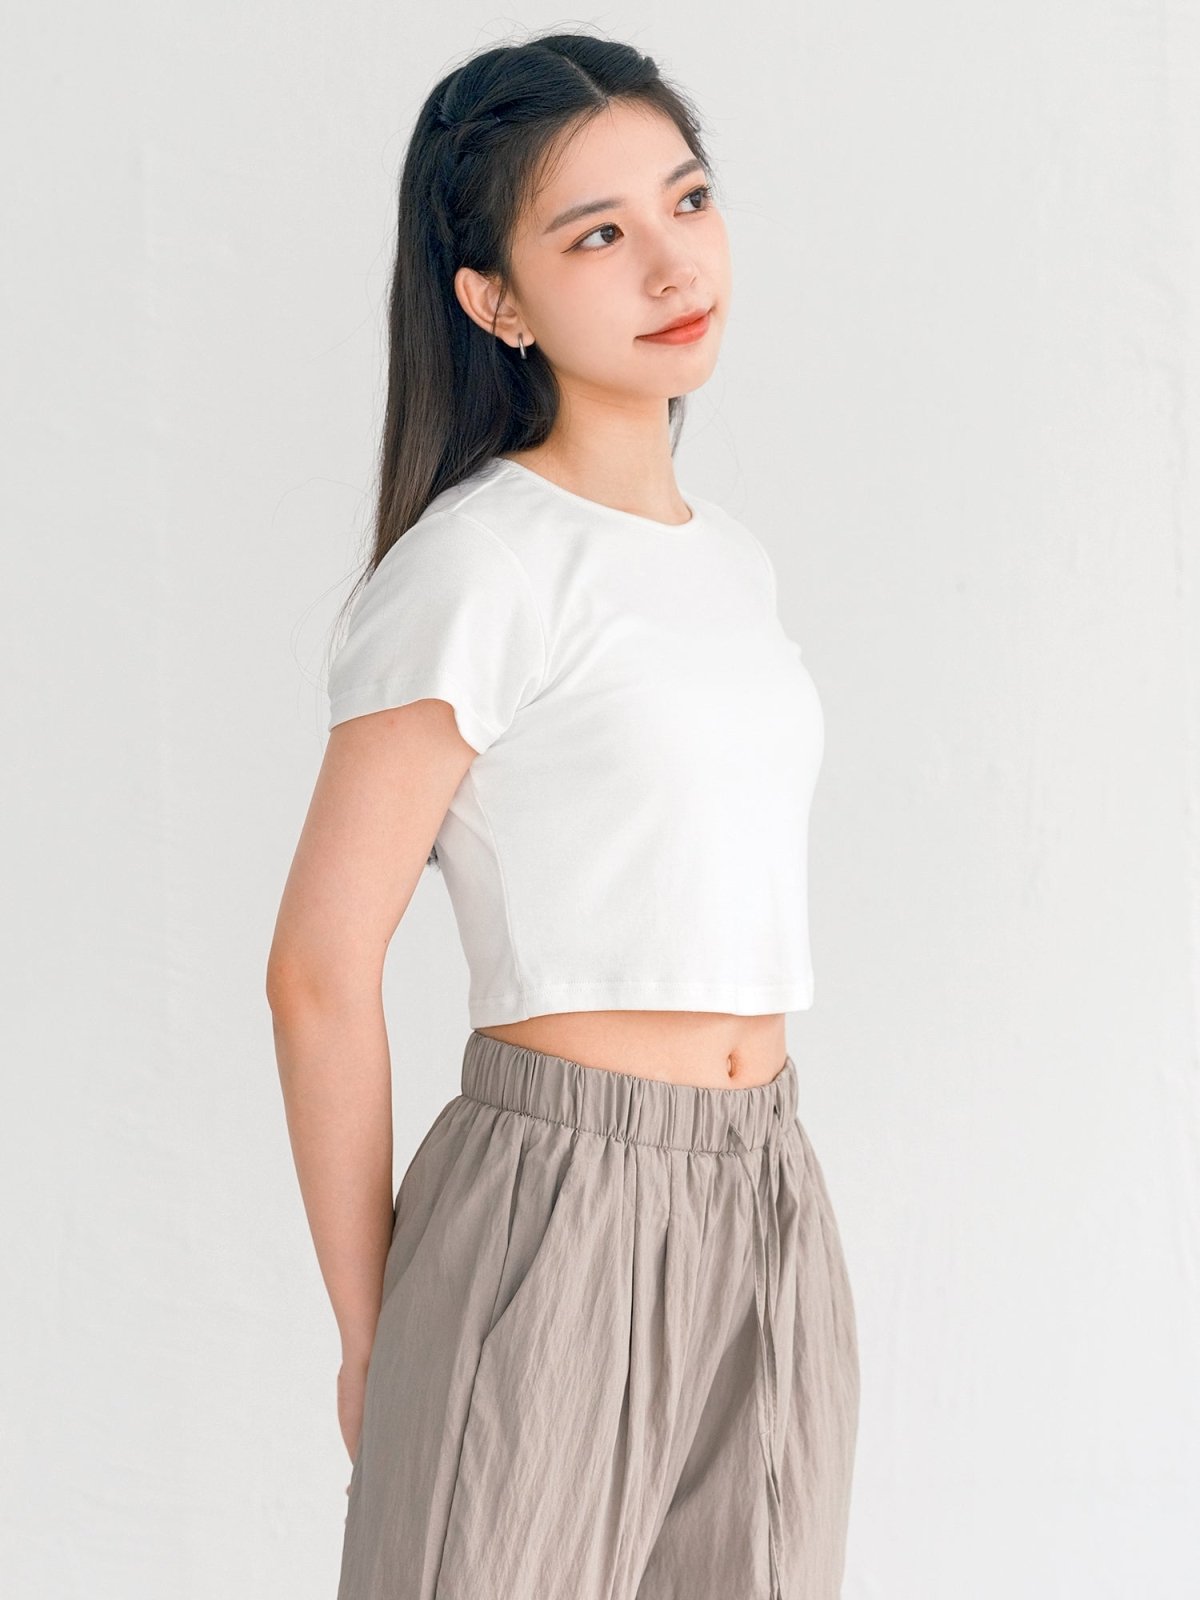 Everyday Stretchy Crop Tee (7 Colours) - DAG-DD0407-23WhiteS - White - S - D'ZAGE Designs